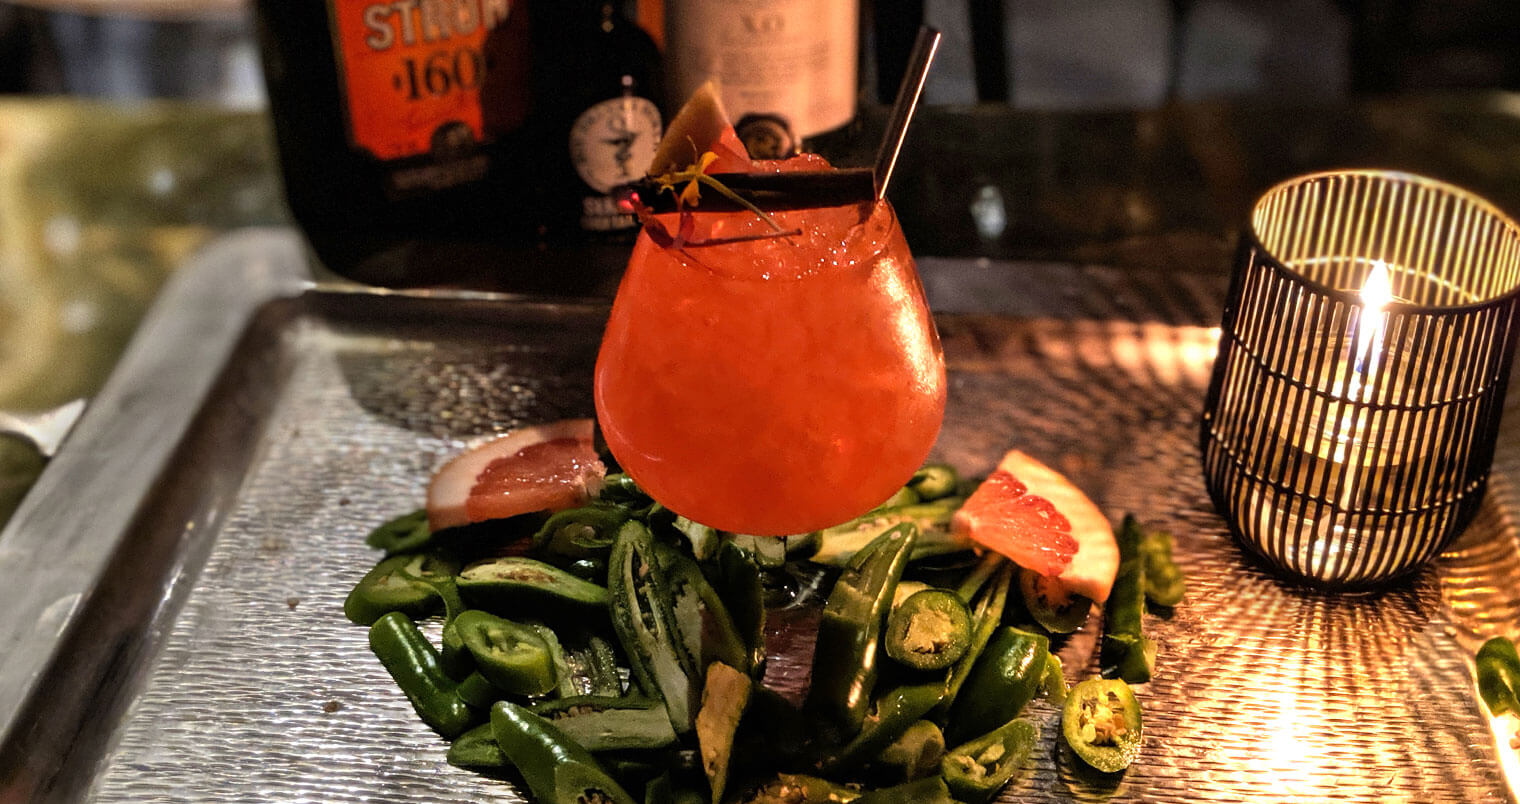 The Captain's Bride cocktail with pepper garnishes, and bottles in background, featured image